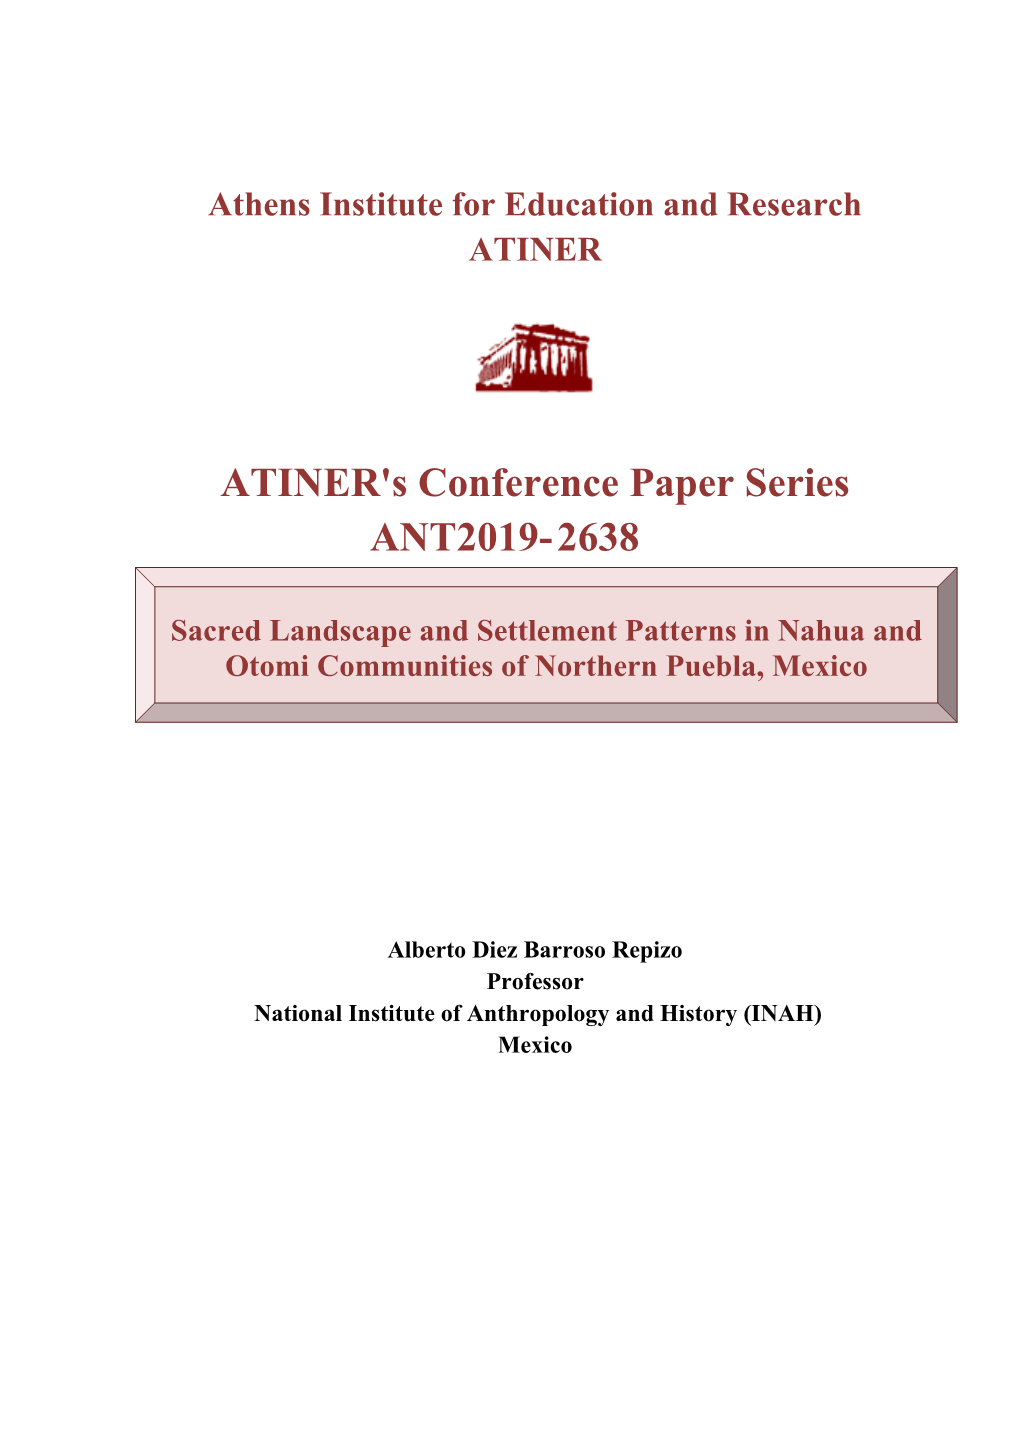 ATINER's Conference Paper Series ANT2019-2638